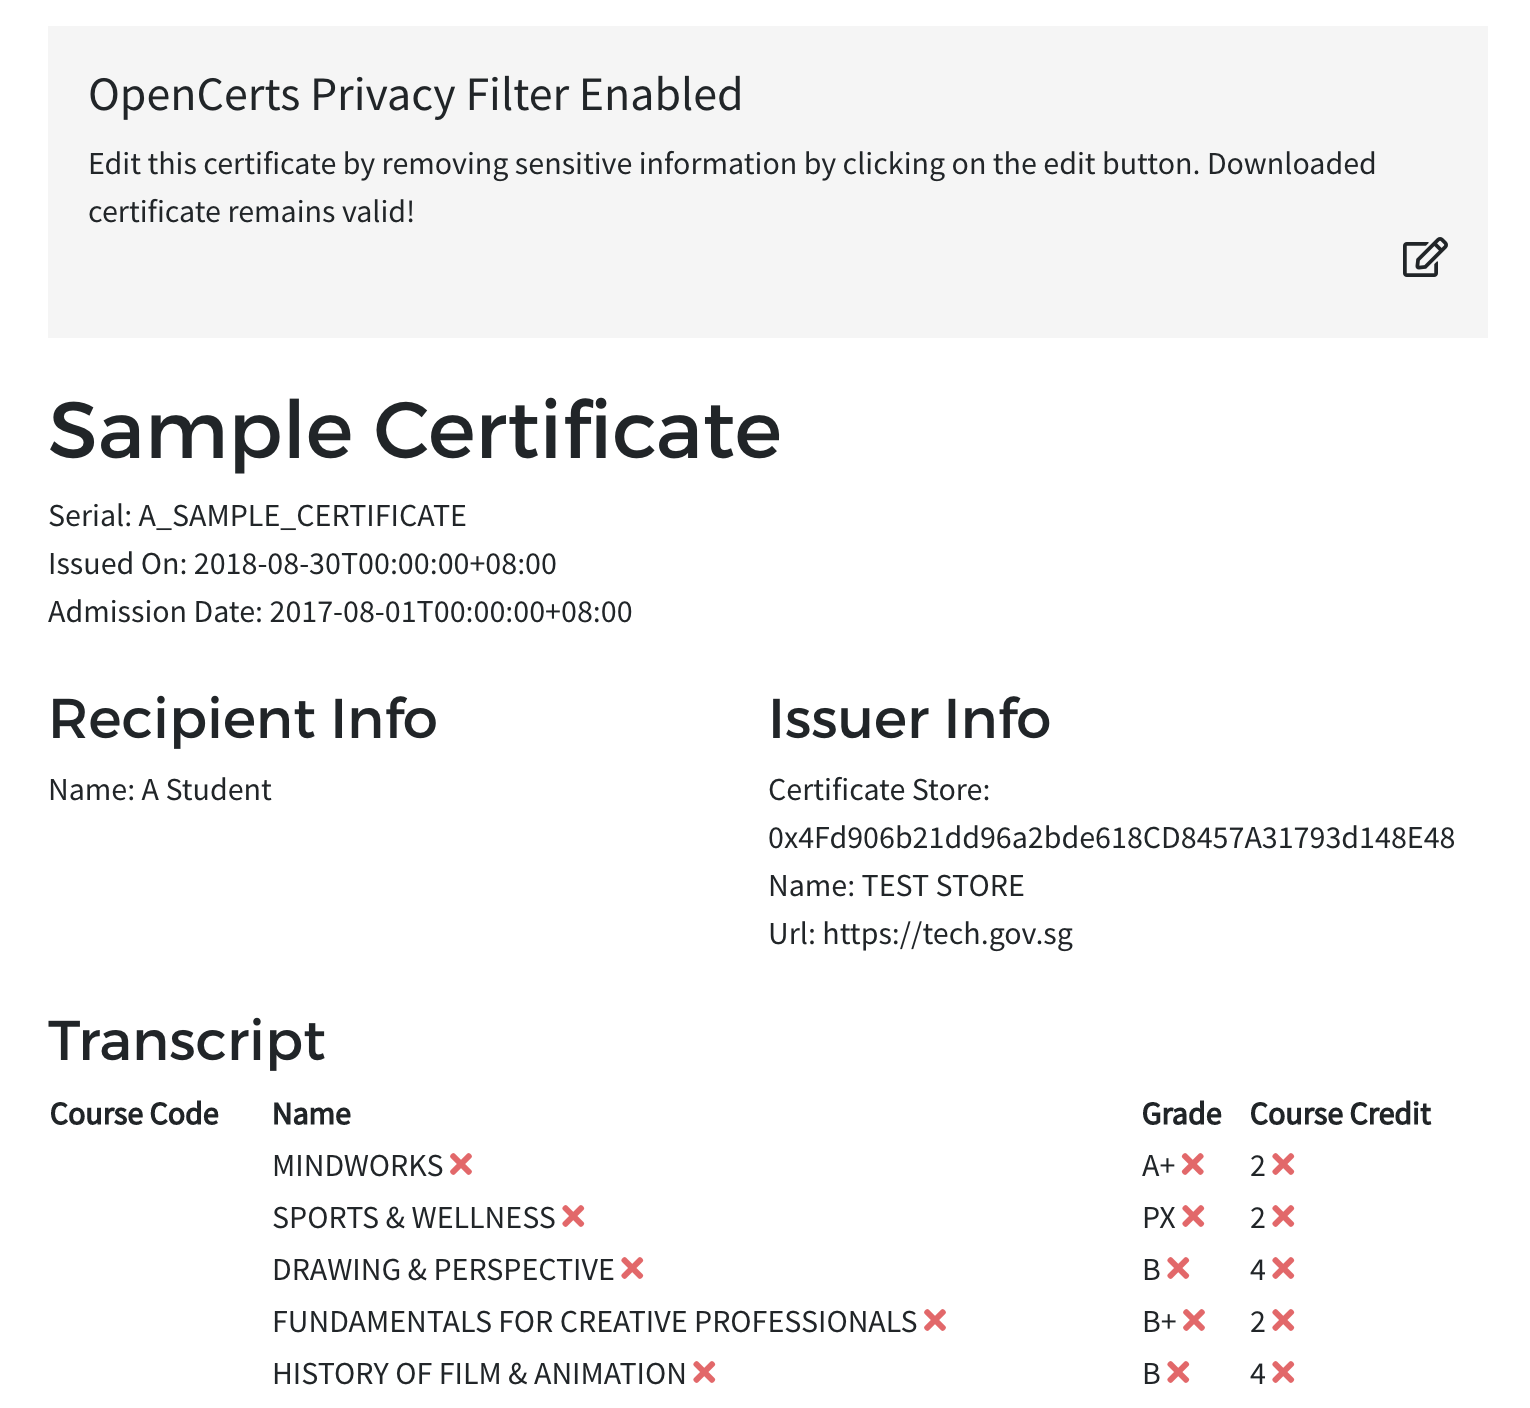 Data Obfuscation in Default Certificate